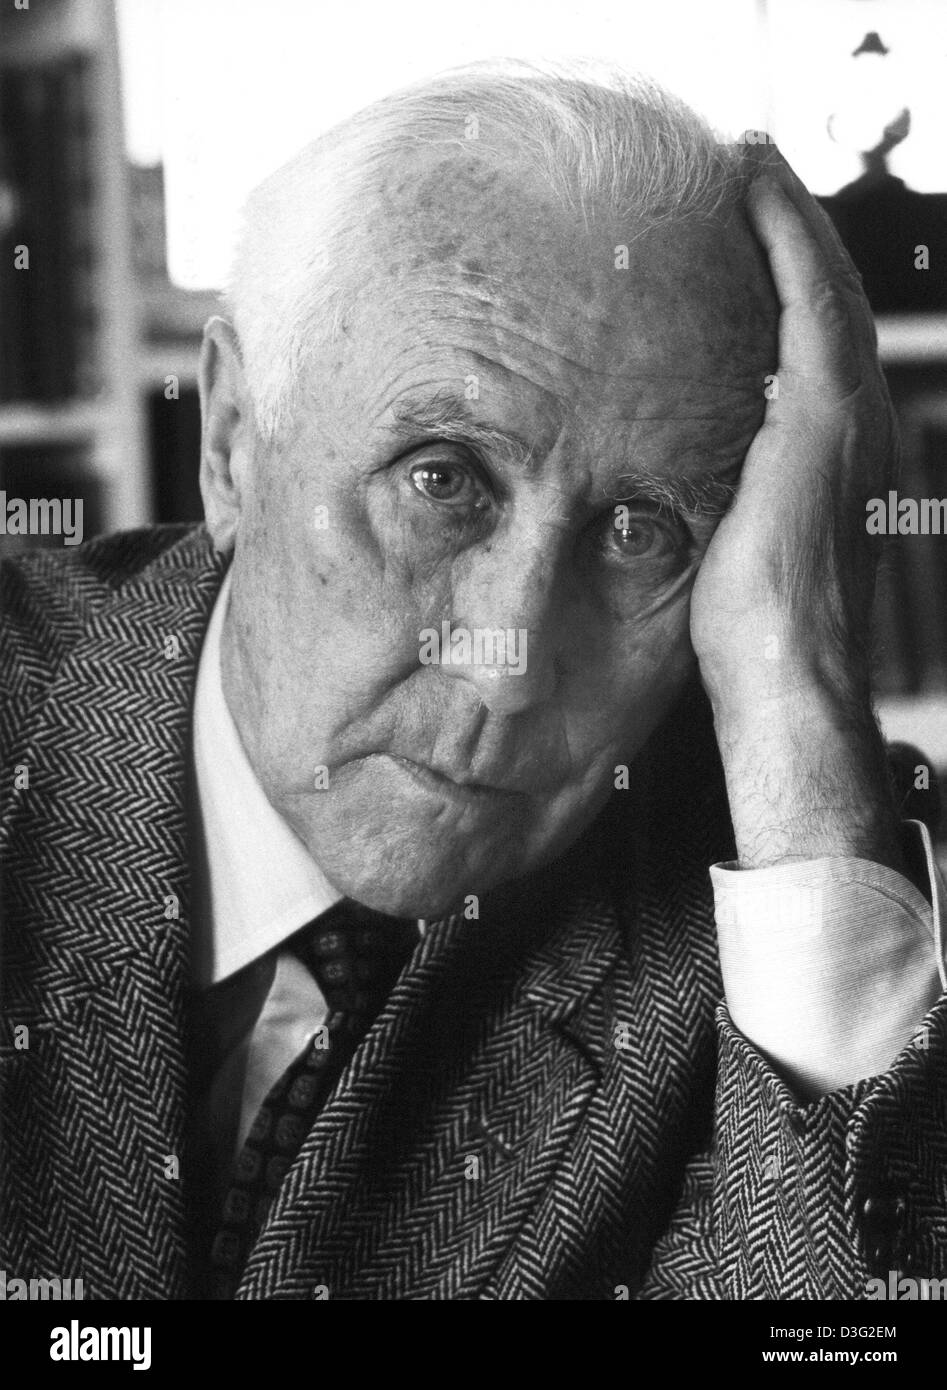 (dpa files) - German composer and conductor Werner Egk pictured in West Germany, 12 May 1981. He was born on 17 May 1901 in Auchsesheim, Germany, and died on 10 July 1983 in Inning am Ammersee, West Germany. He began writing incidental music while he was still a pupil of Orff in Munich, and established himself with the operas 'Die Zaubergeige' (the magic violin, 1935) and 'Peer Gyn Stock Photo